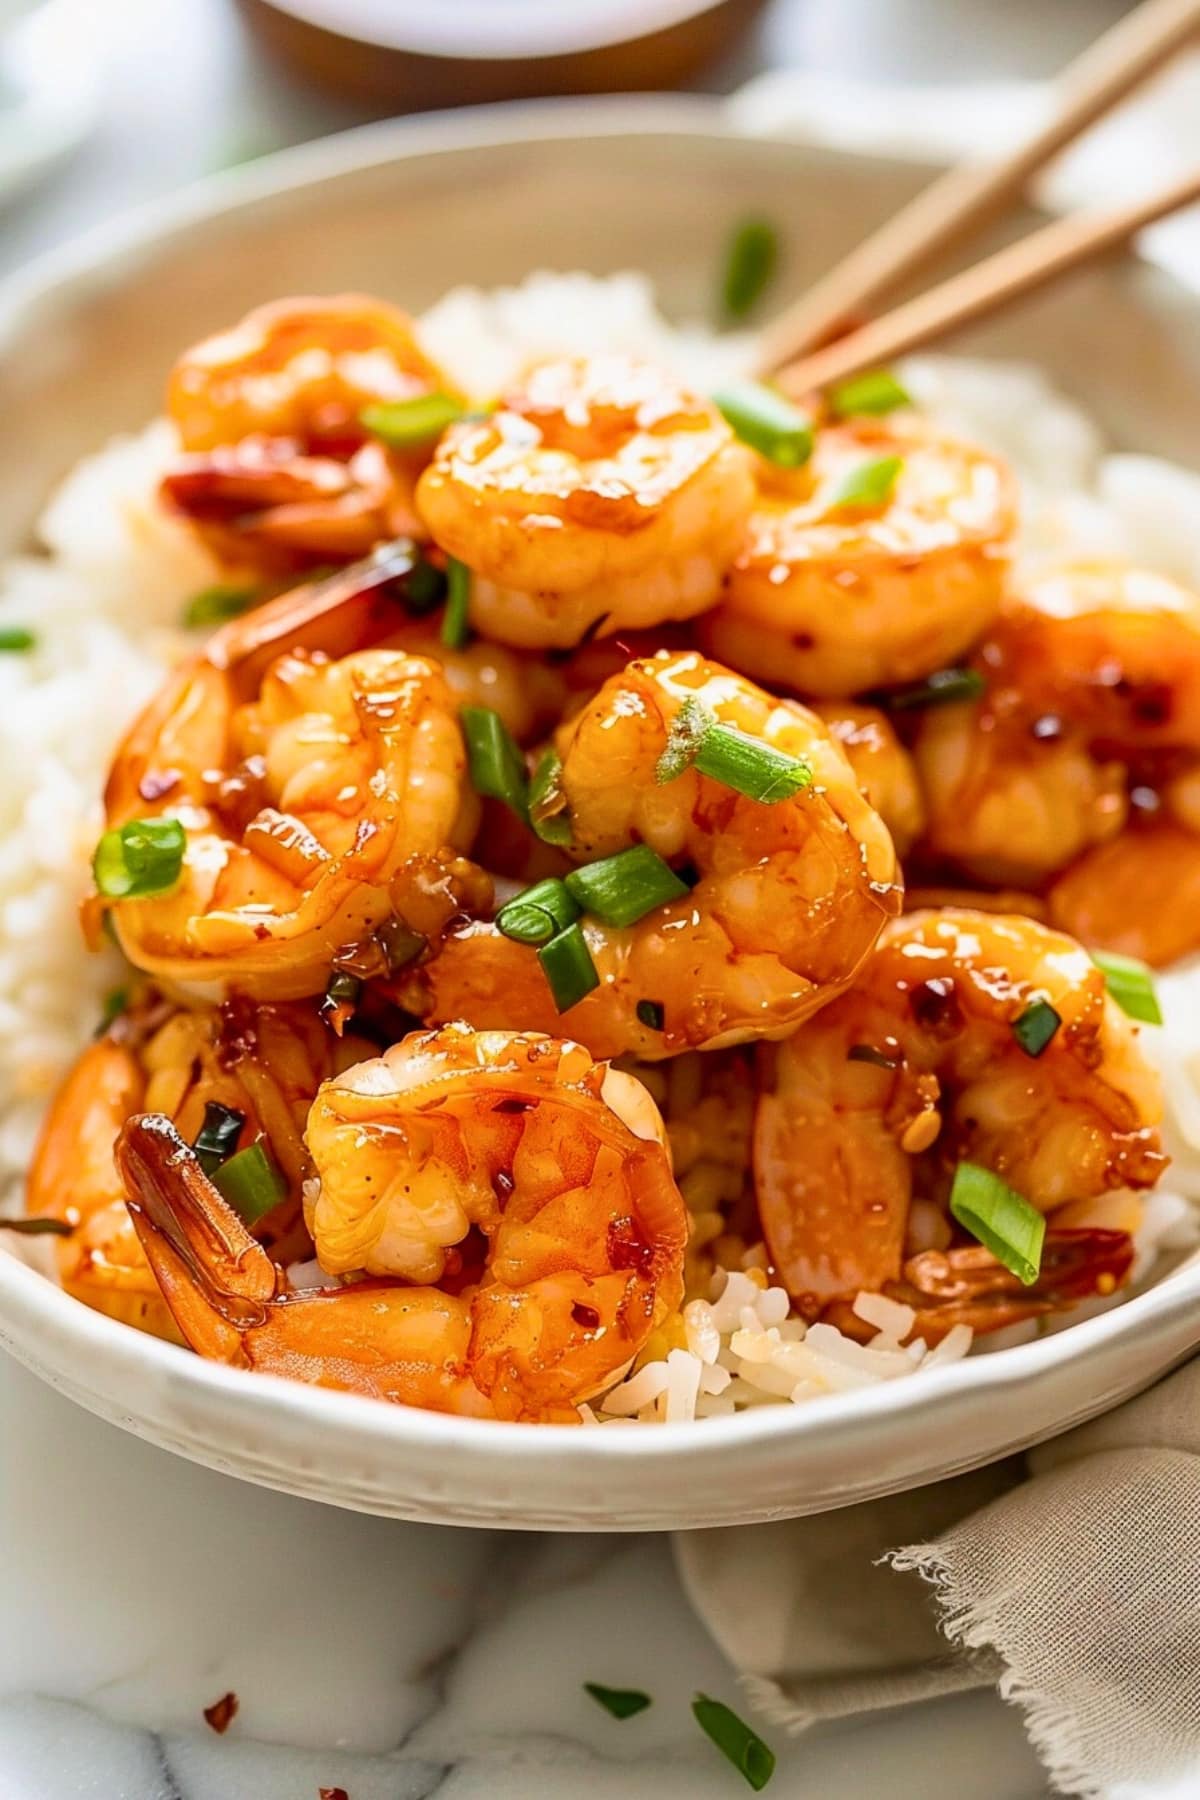 Honey garlic shrimp served on top of white rice in a bowl.